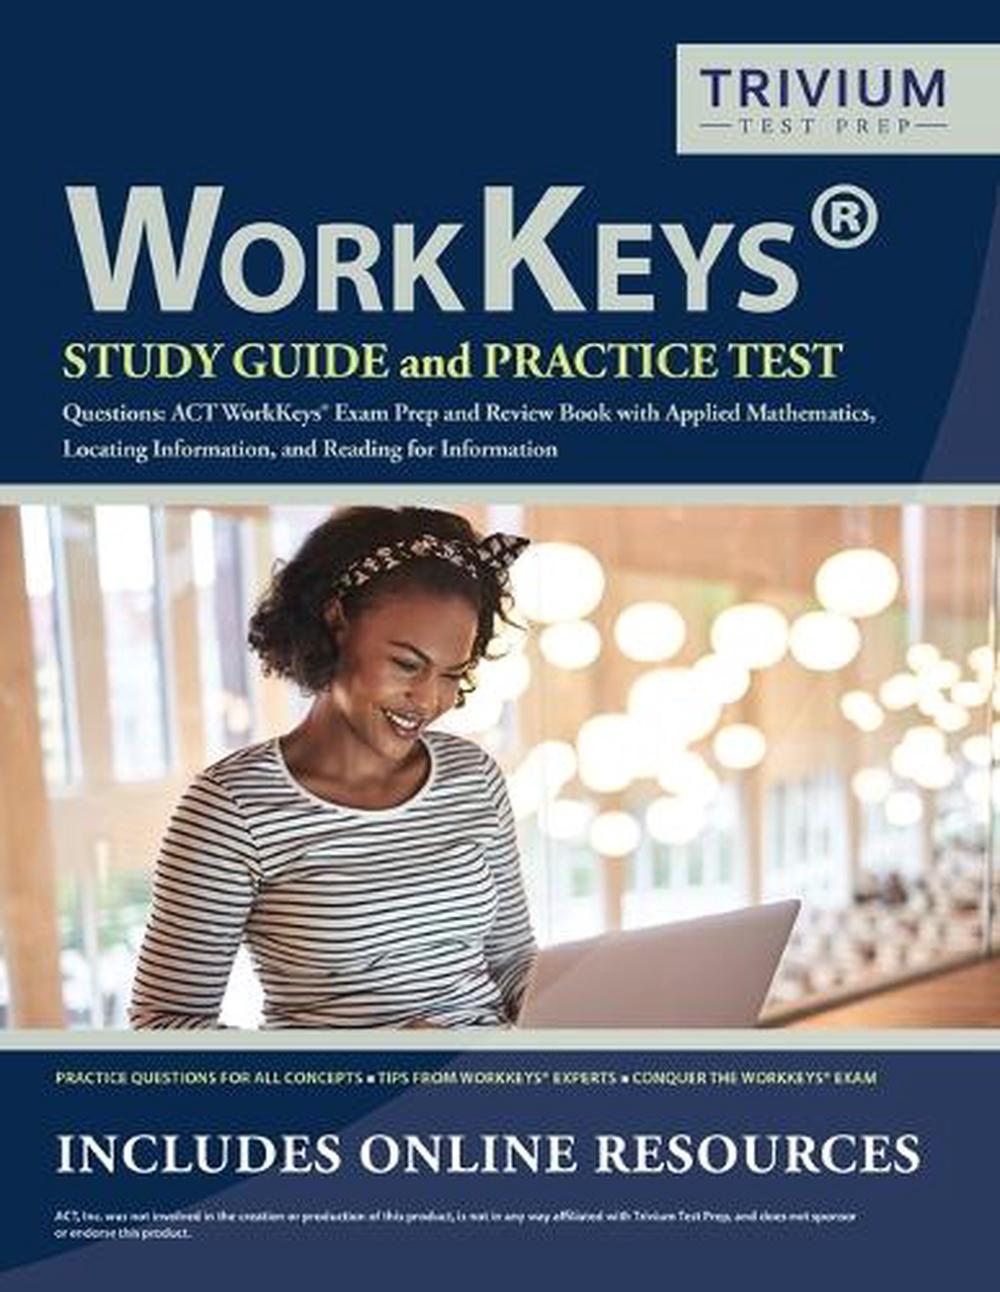 WorkKeys Study Guide and Practice Test Questions: ACT WorkKeys Exam